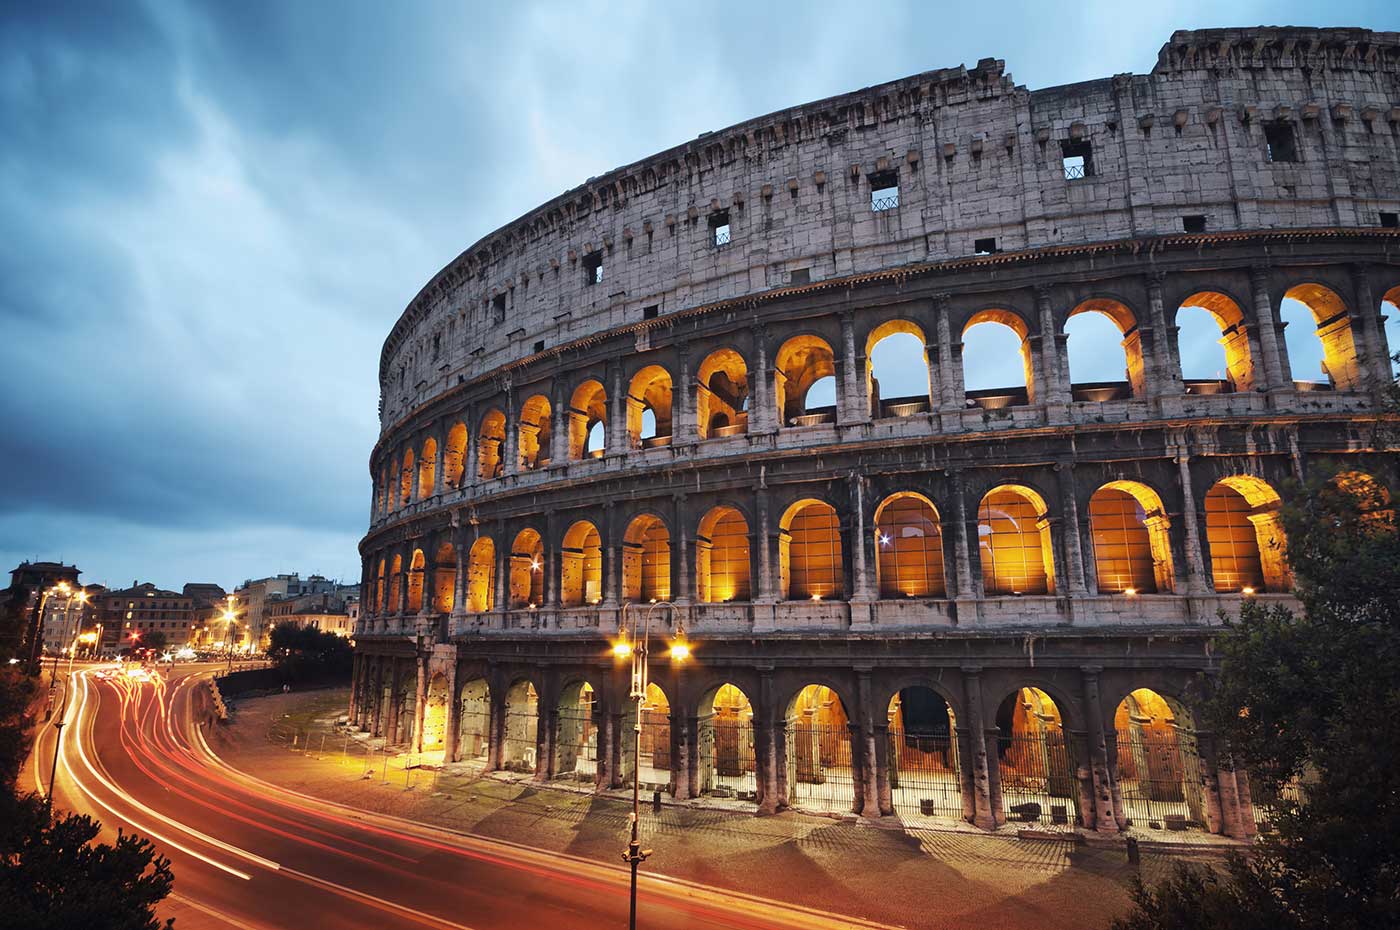 is rome italy expensive to visit